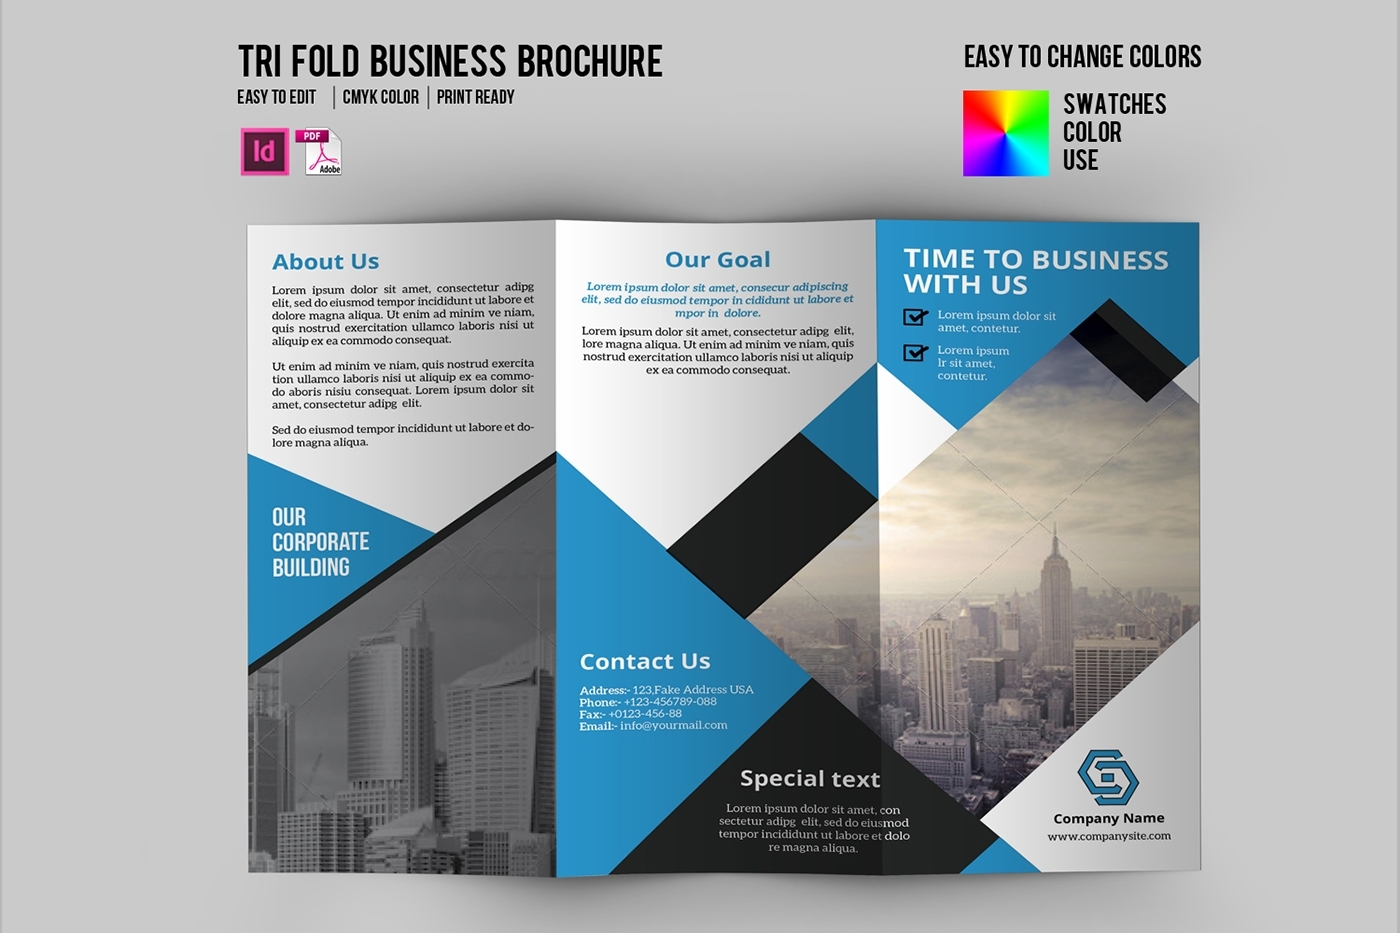 Indesign Business Brochure On Behance Throughout Brochure Template Indesign Free Download